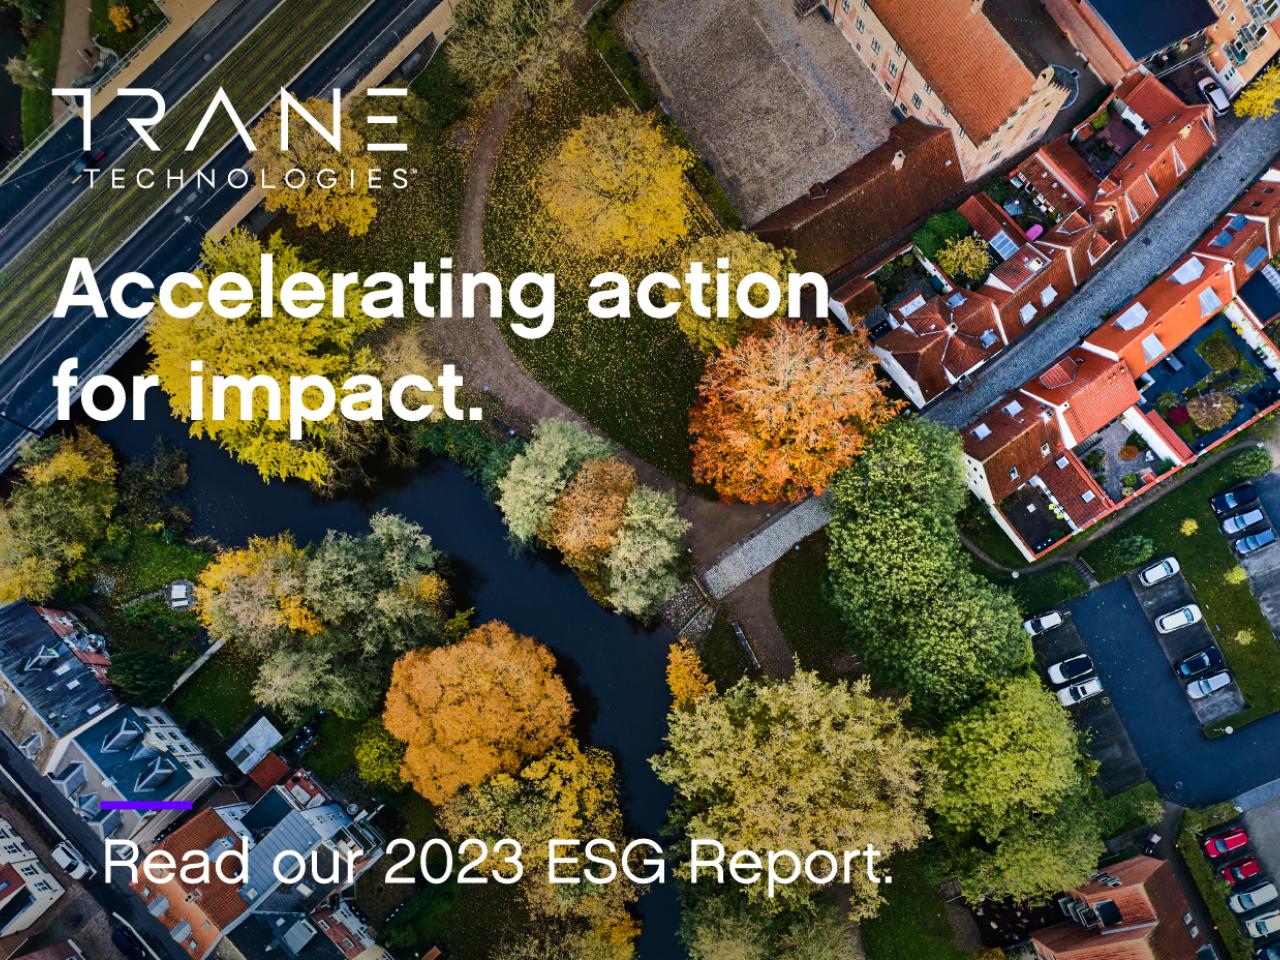 Trane Technologies Accelerating action for impact. Read our 2023 ESG Report